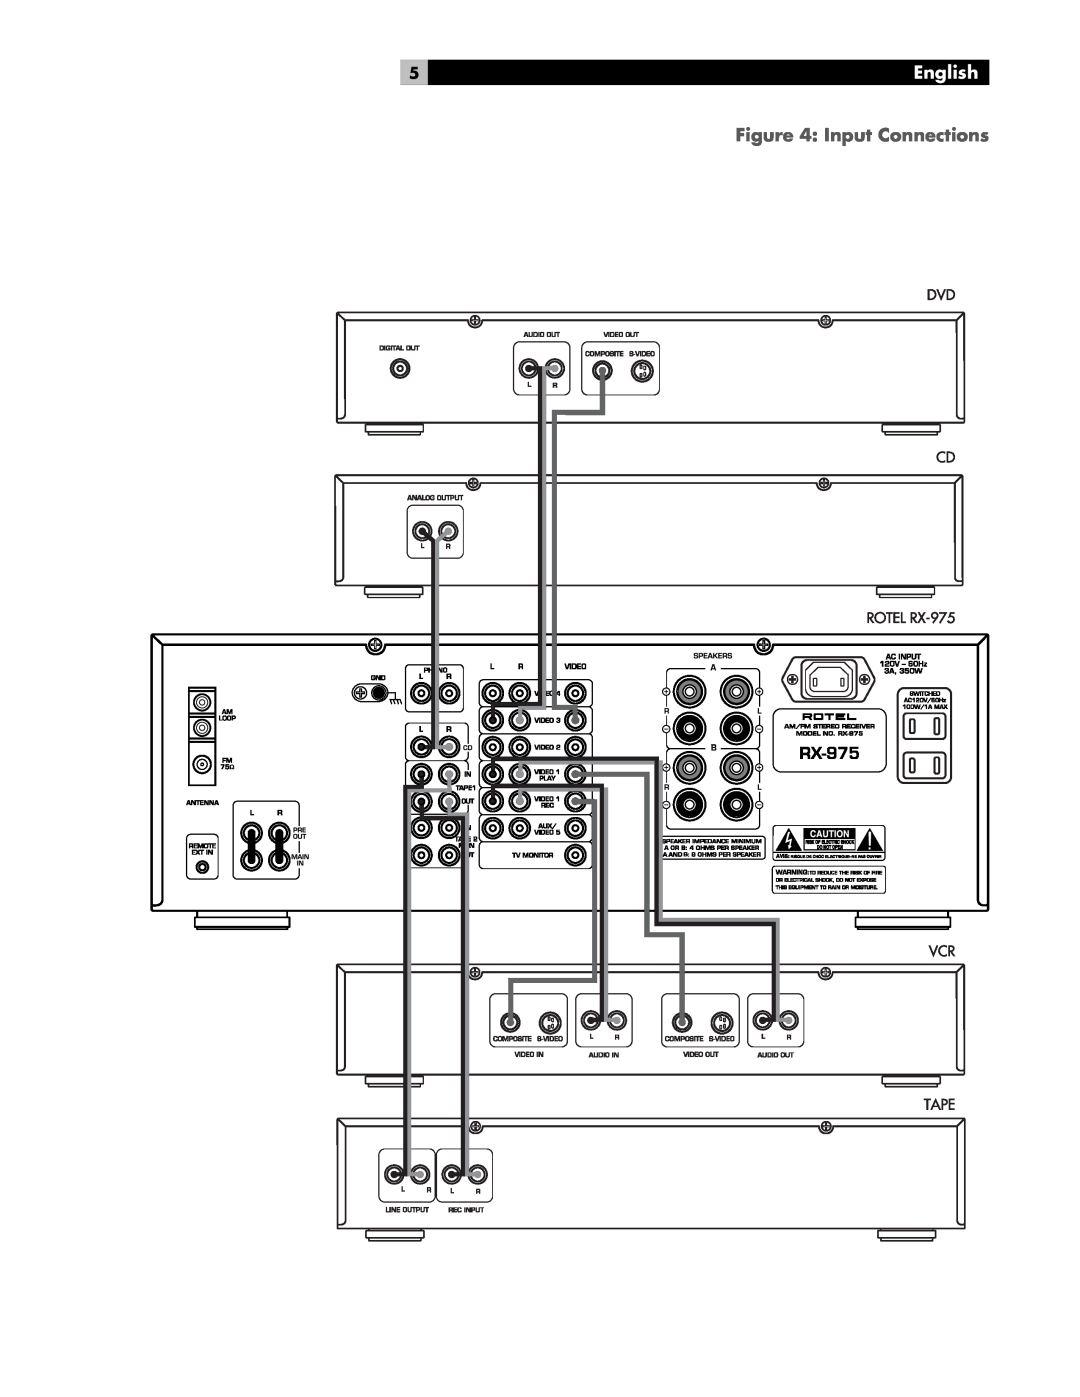 Rotel RX-975 owner manual Input Connections, English 